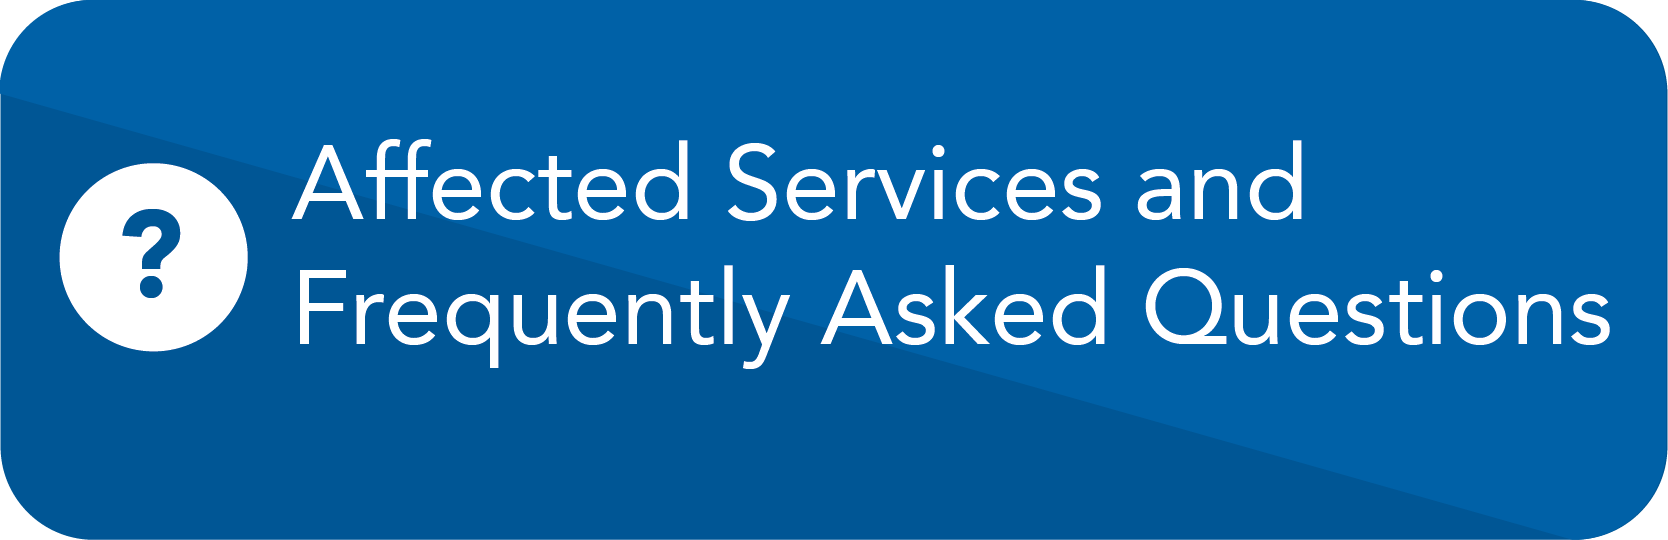 affected services and frequently asked questions button